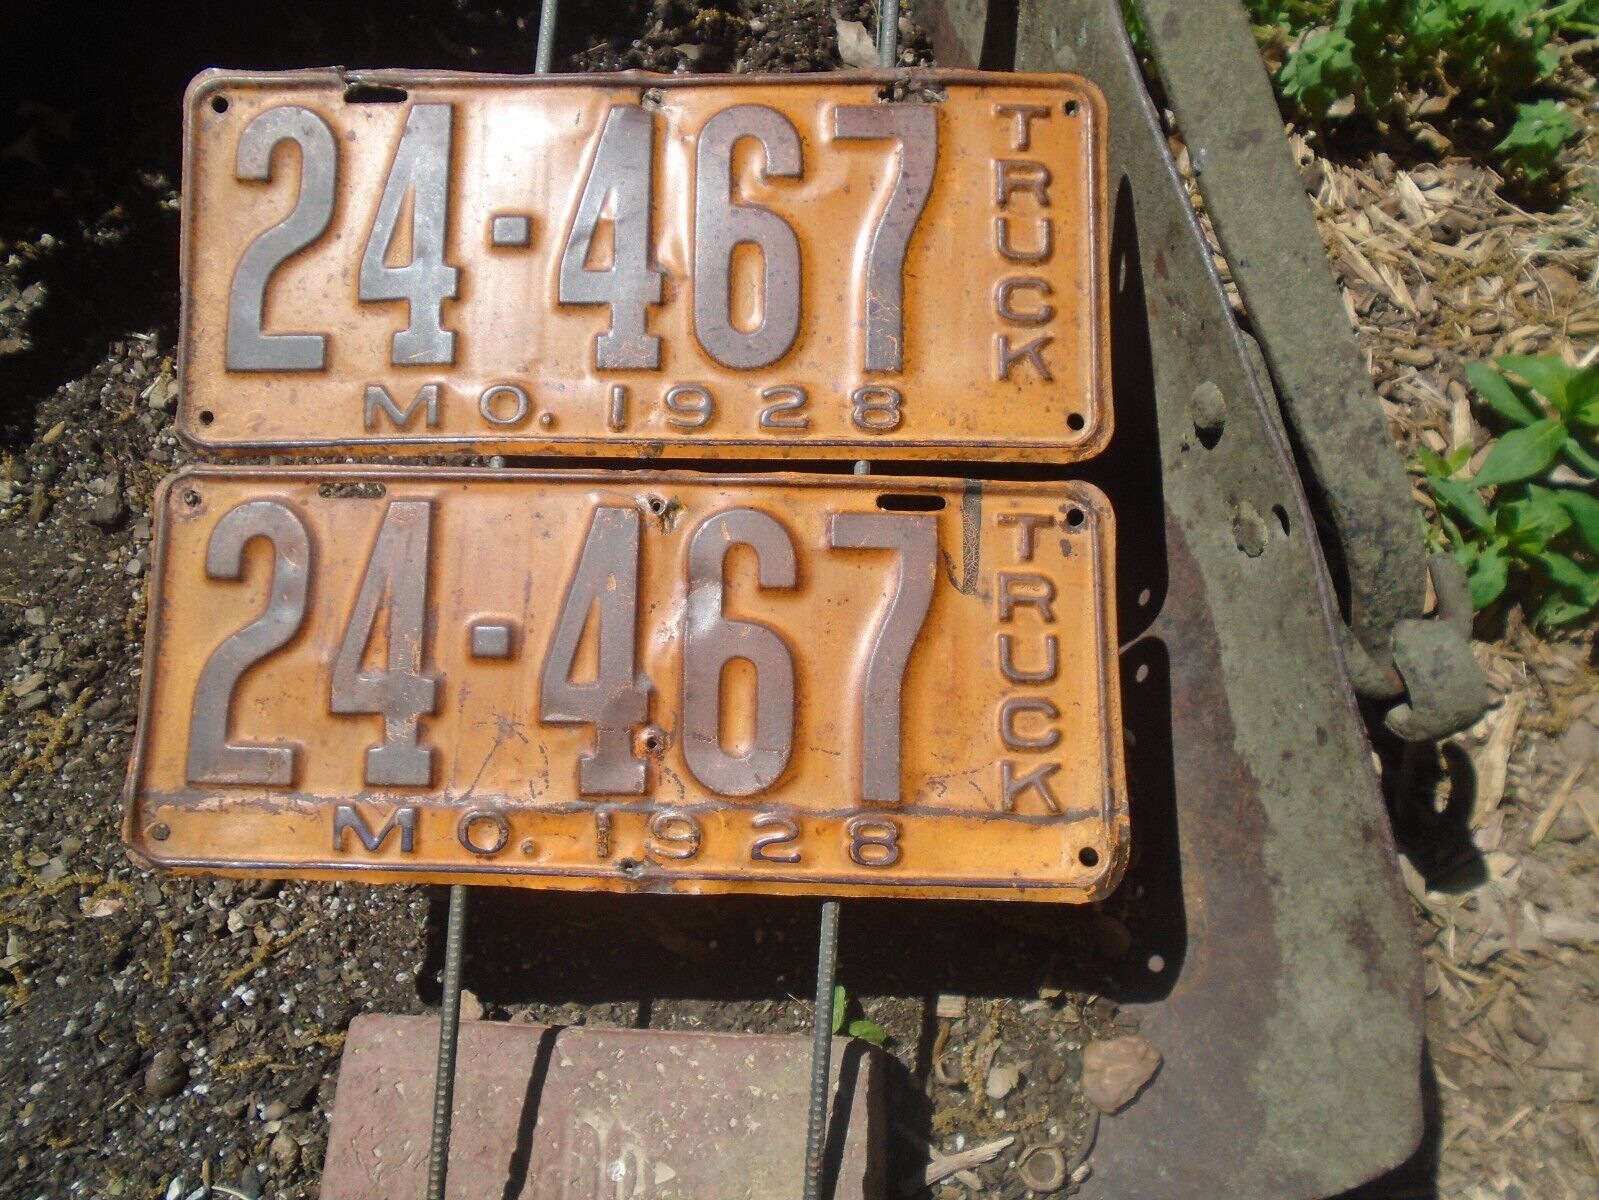 Missouri 1928 Truck License Plate pair, Model A, Ford, vintage